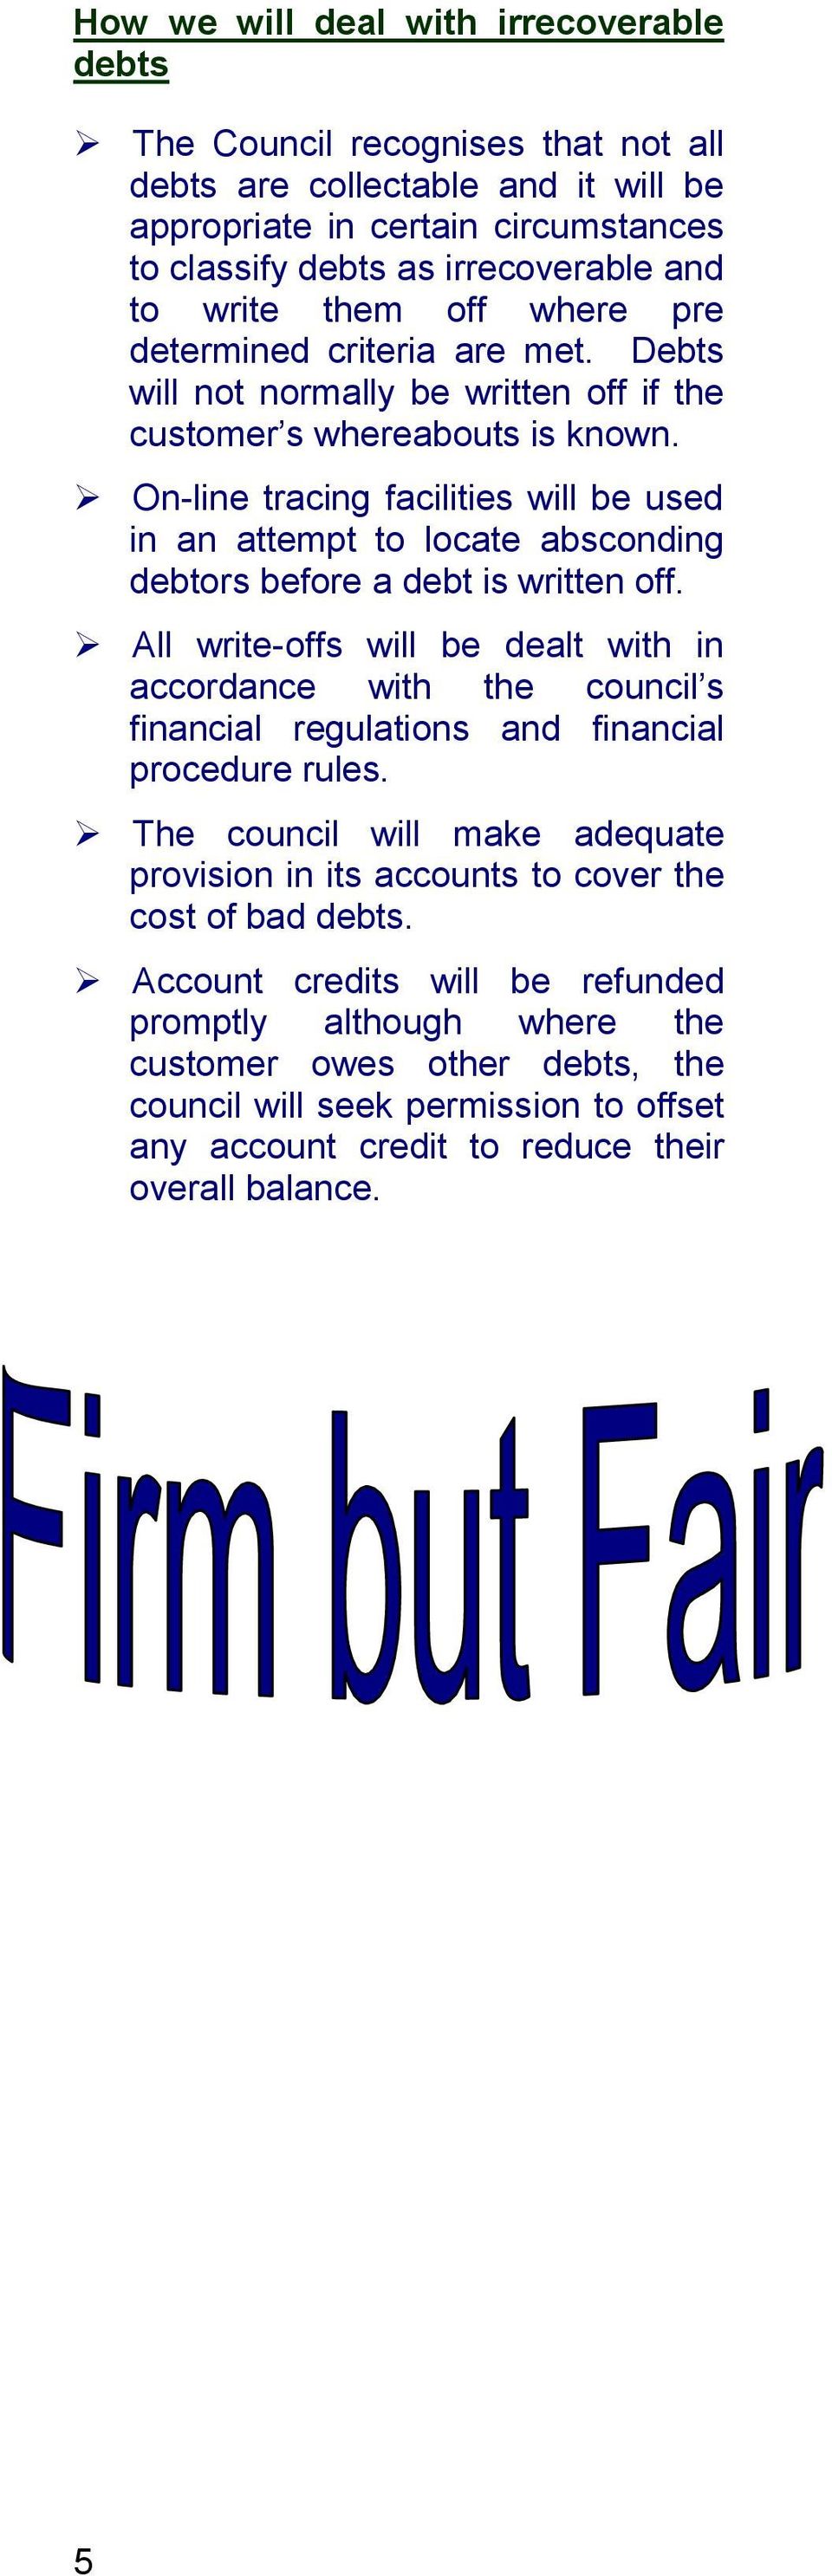 On-line tracing facilities will be used in an attempt to locate absconding debtors before a debt is written off.